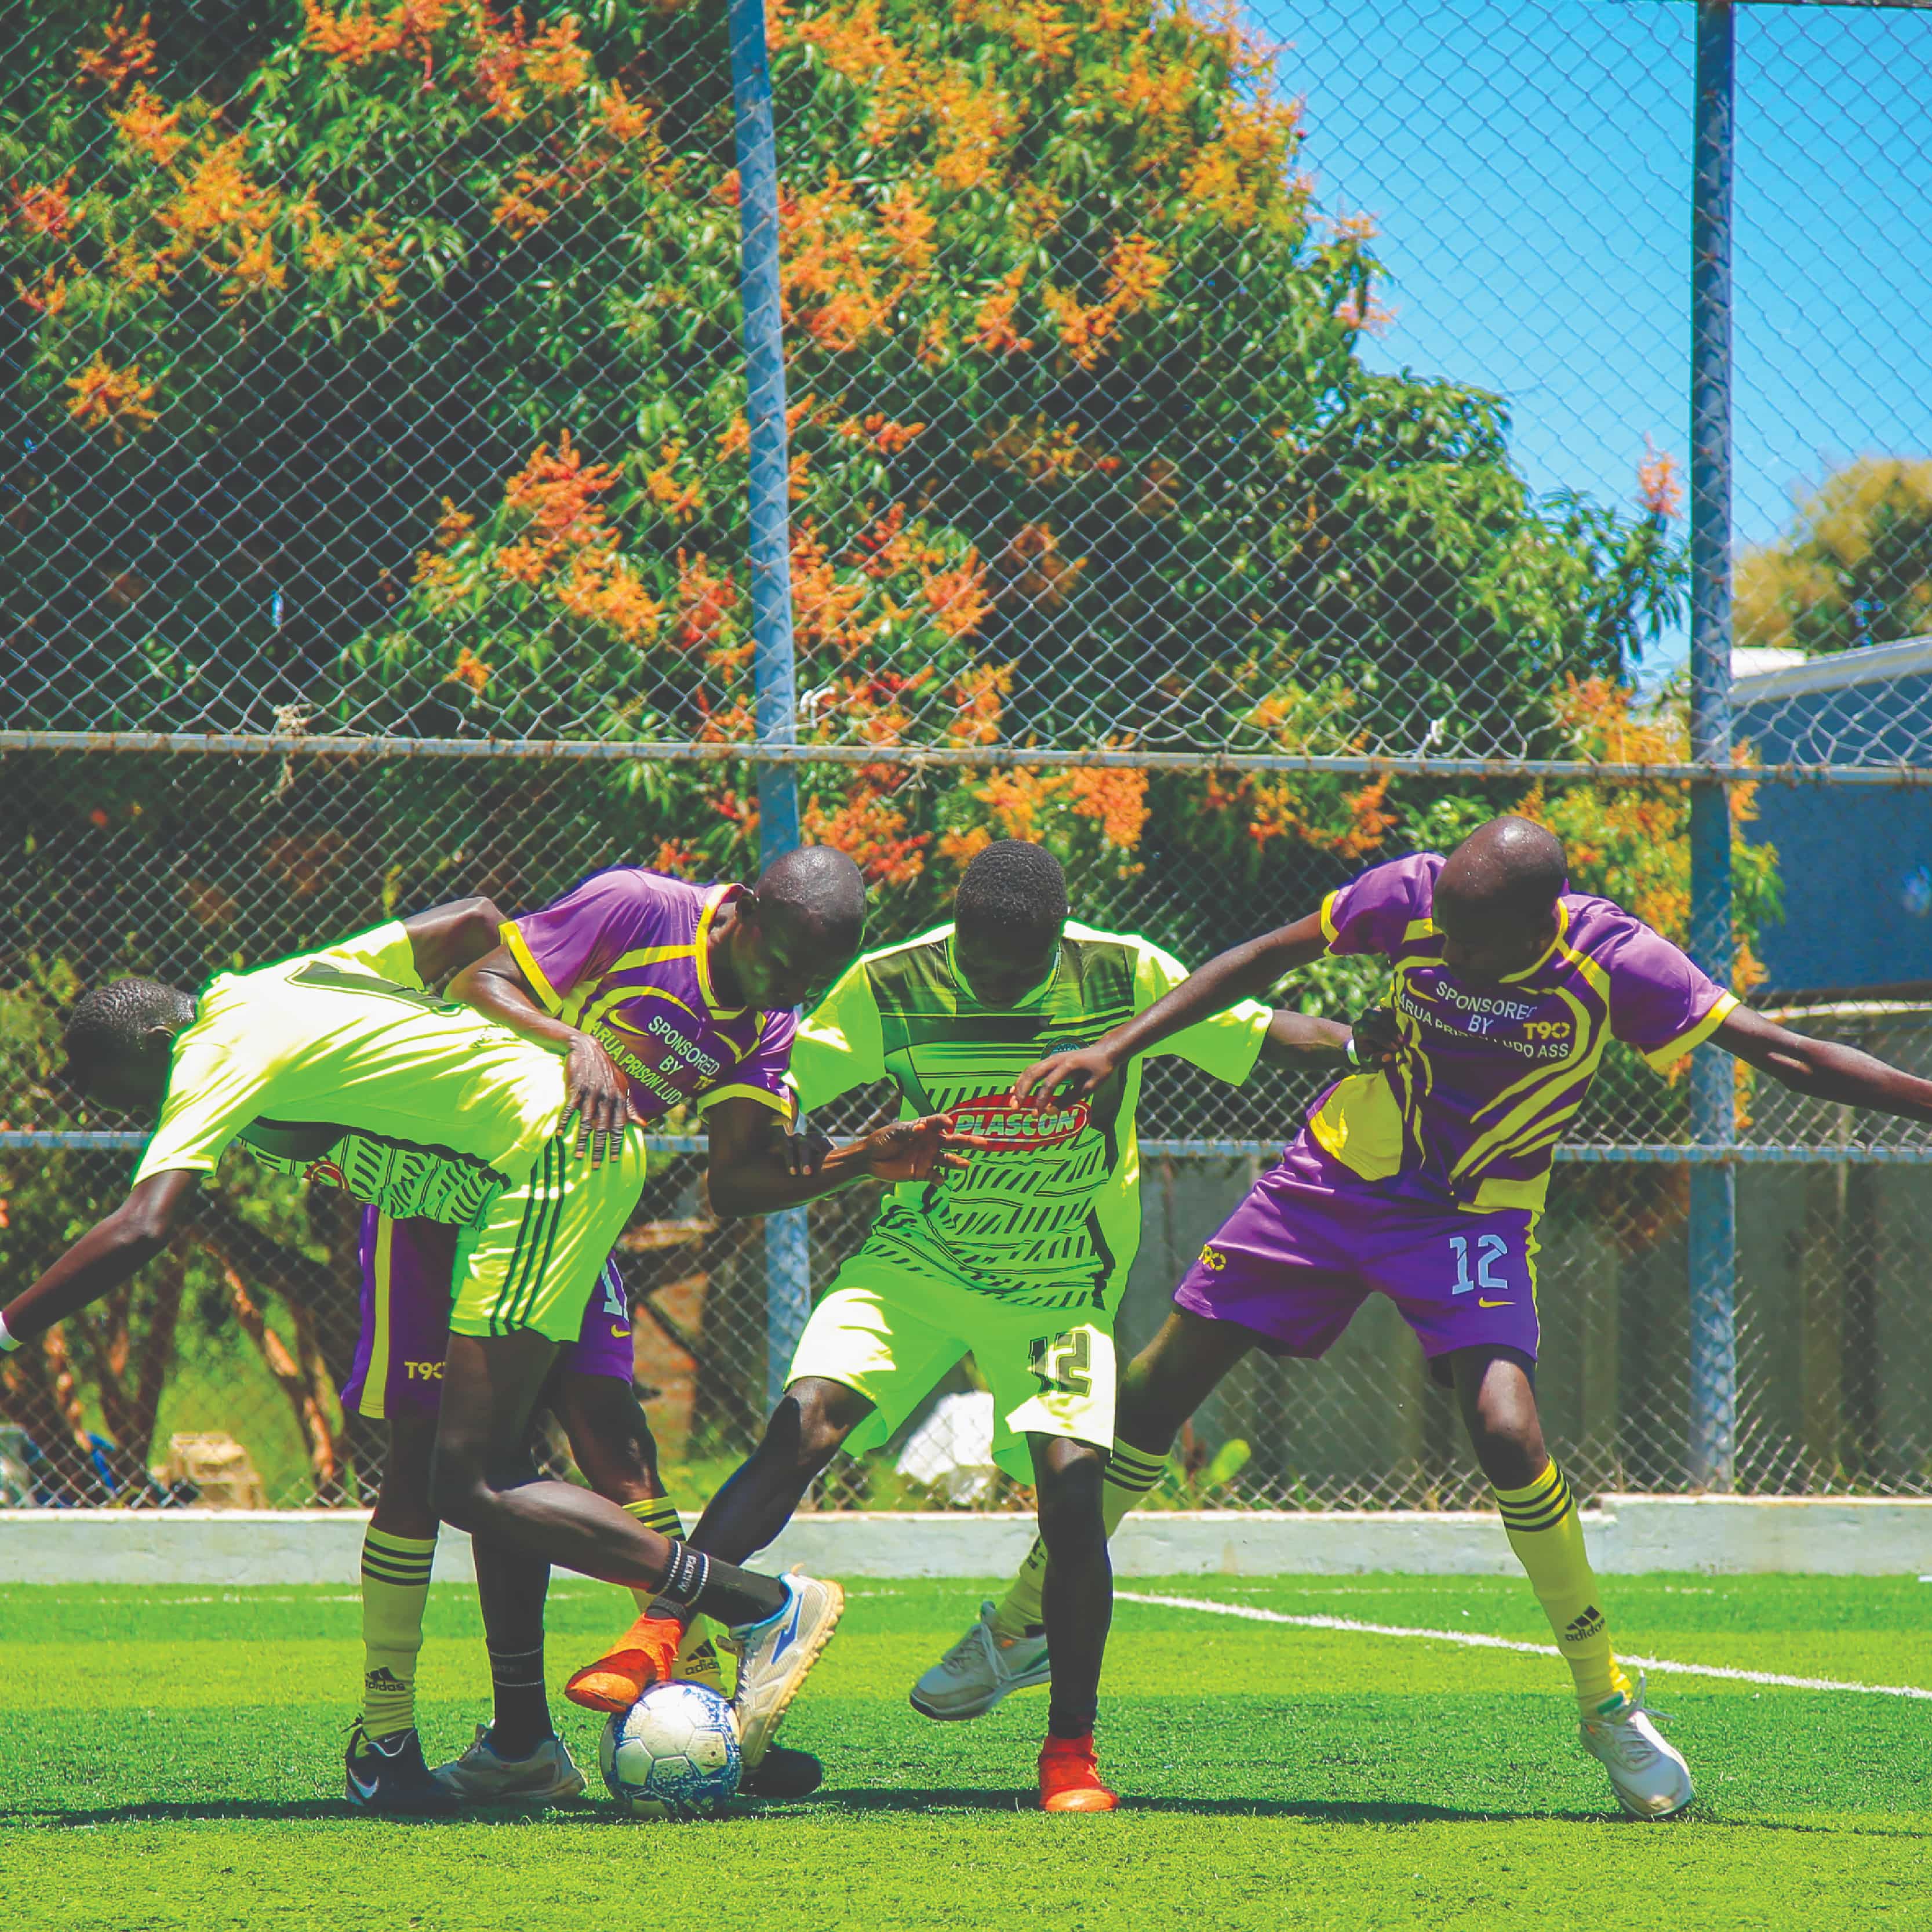 Image of players playing soccer on artificial turf